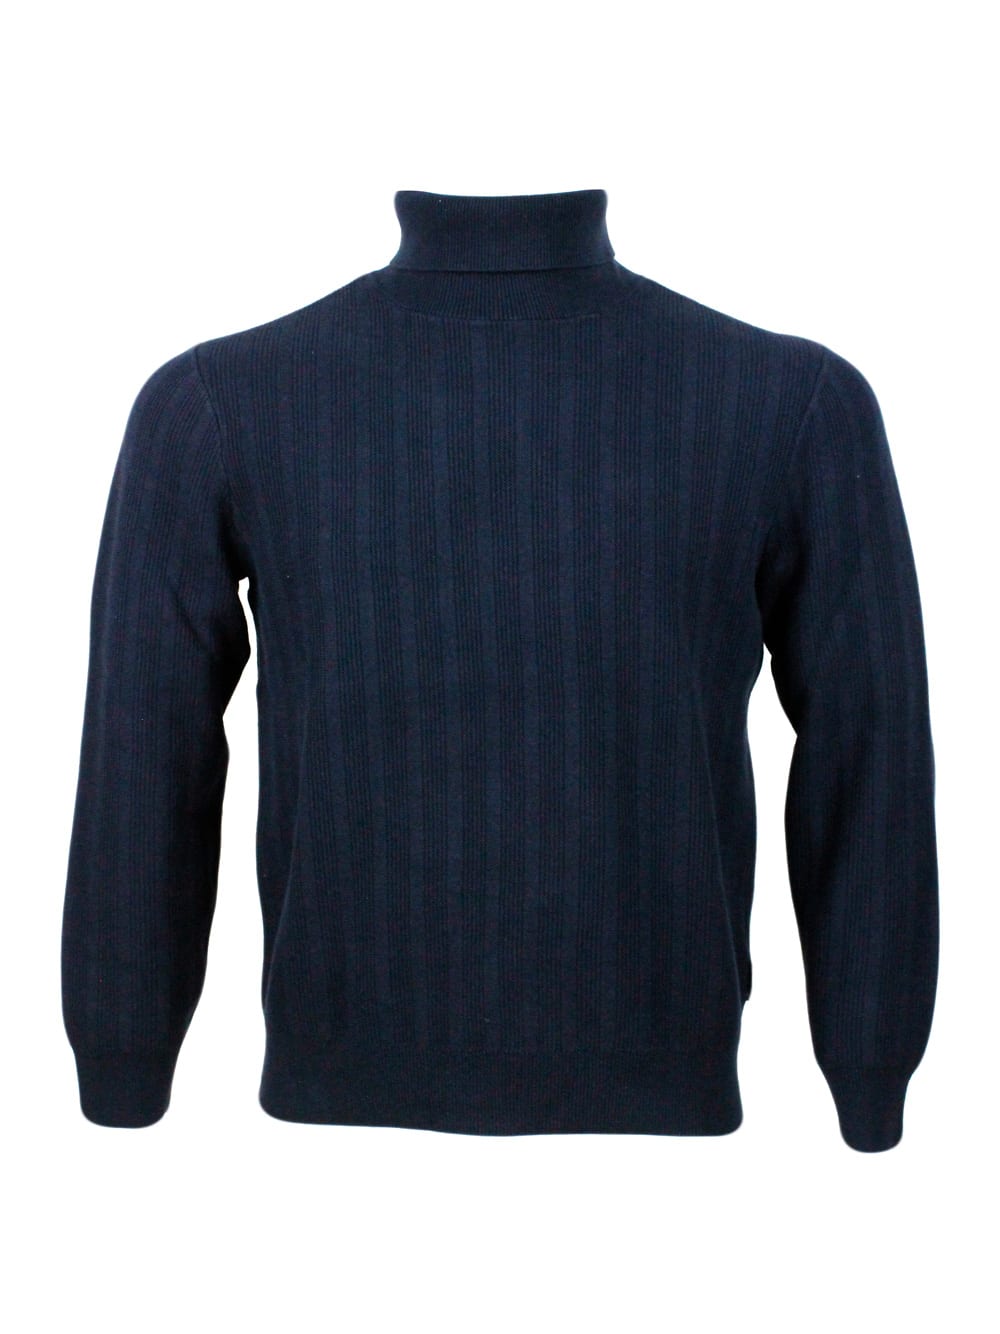 Turtleneck Sweater With Side Vertical Motif Processing In 100% Warm Cotton